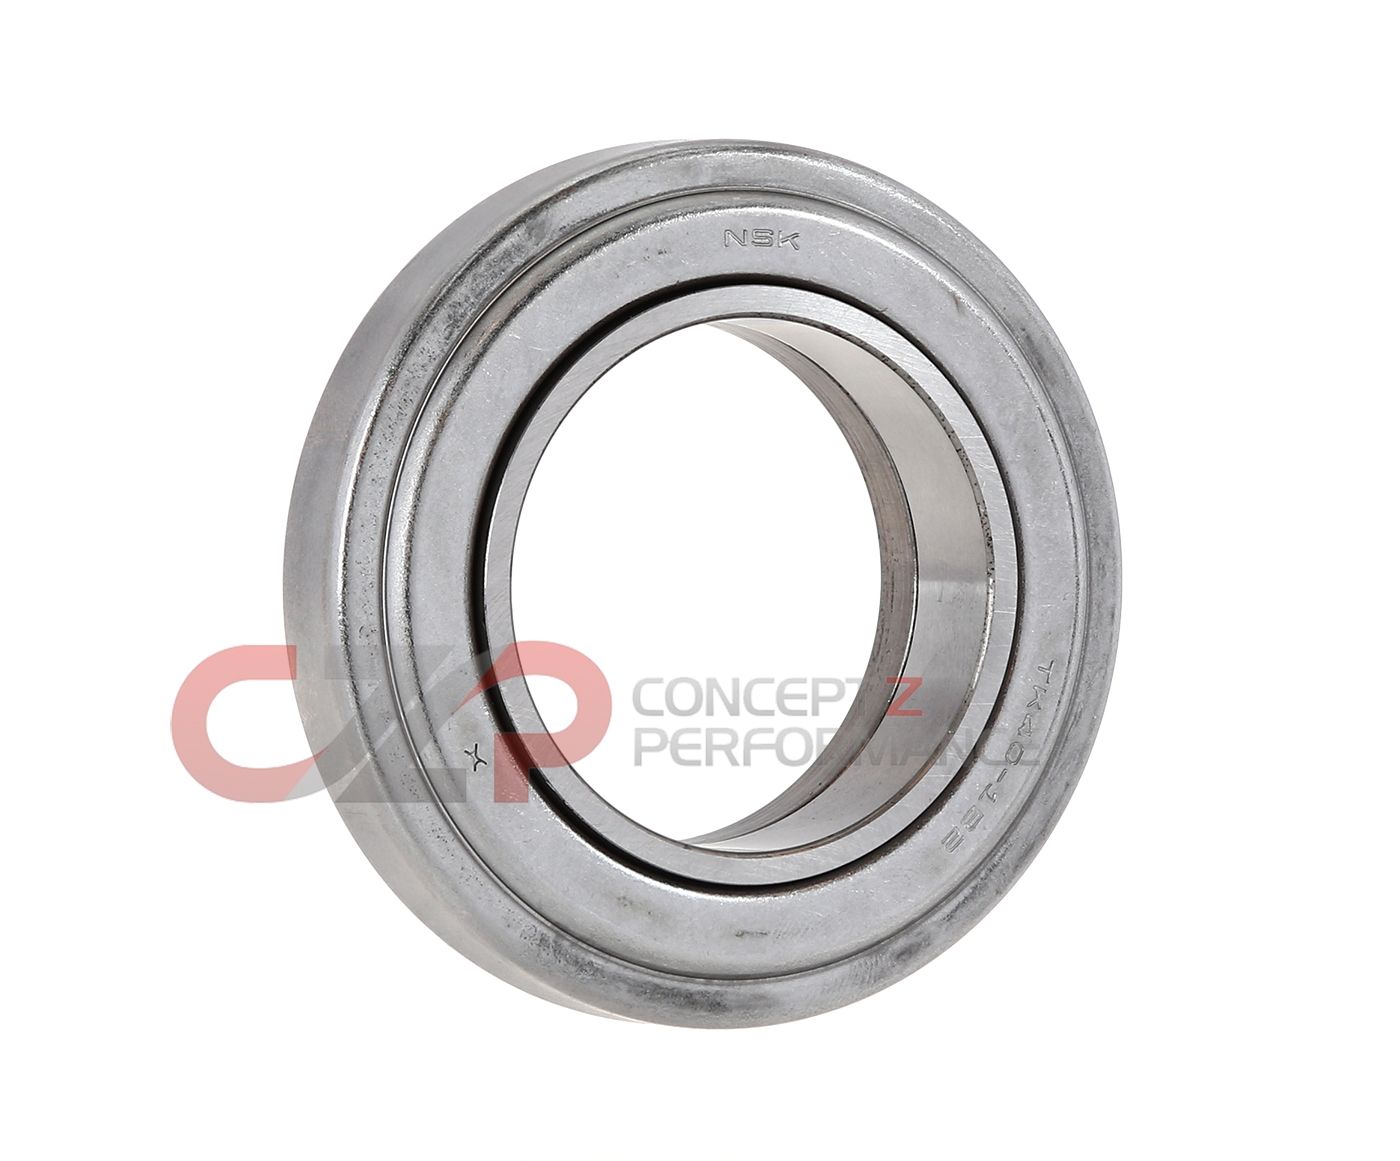 Nissan OEM Throw Out Bearing - Nissan 240SX 95-98 S14